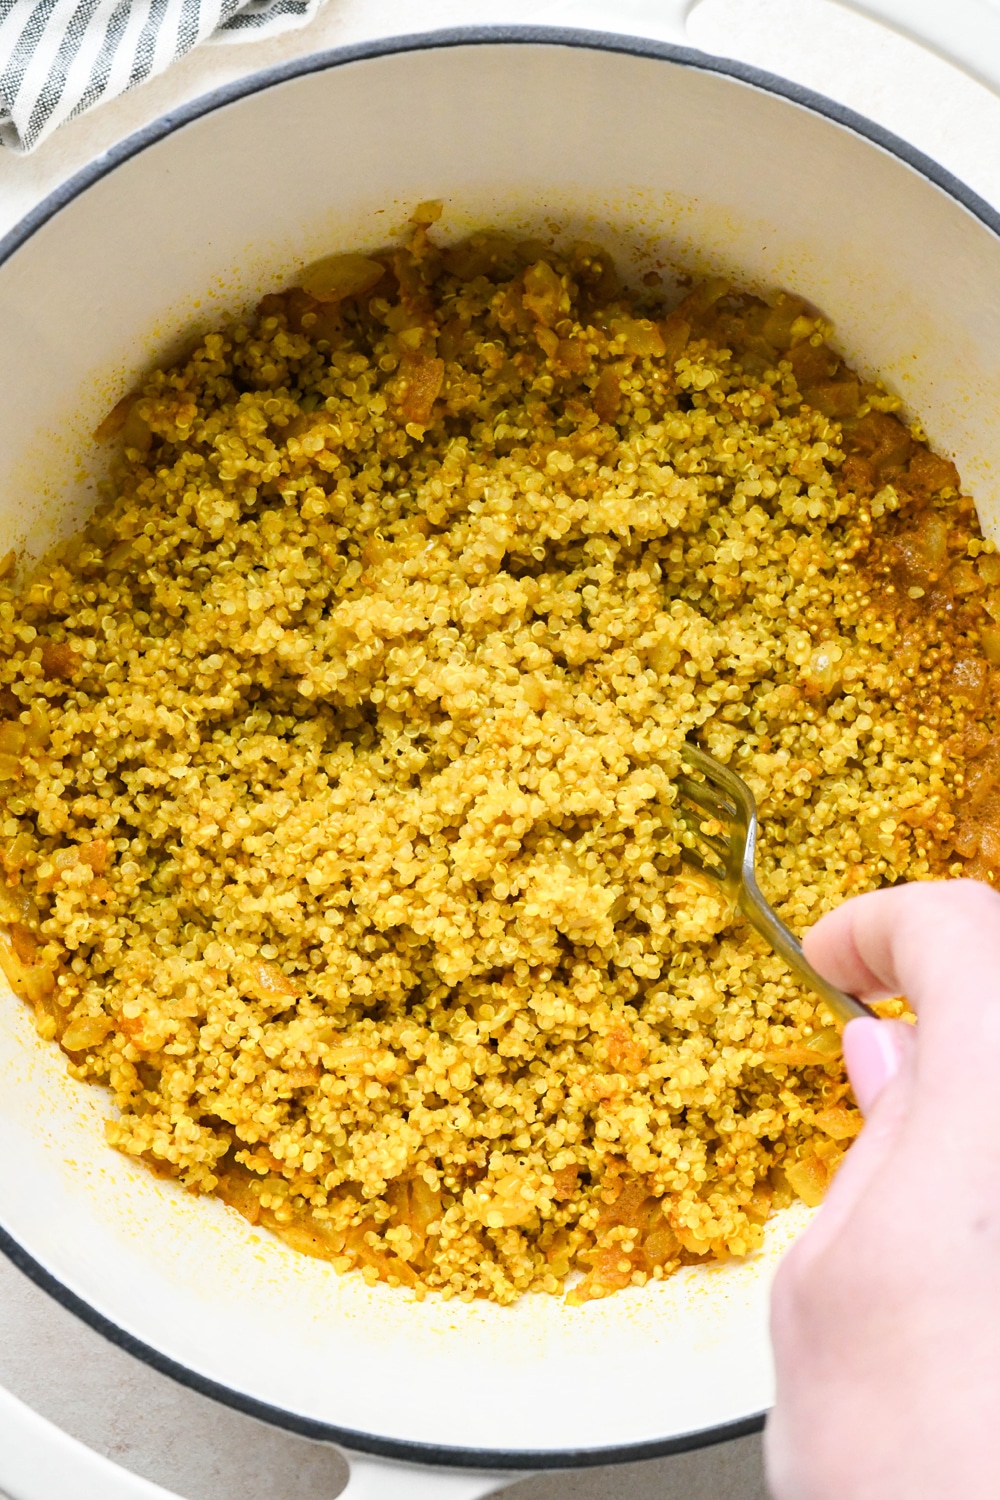 How to make curried quinoa pilaf: Fluffing cooked quinoa with a fork.